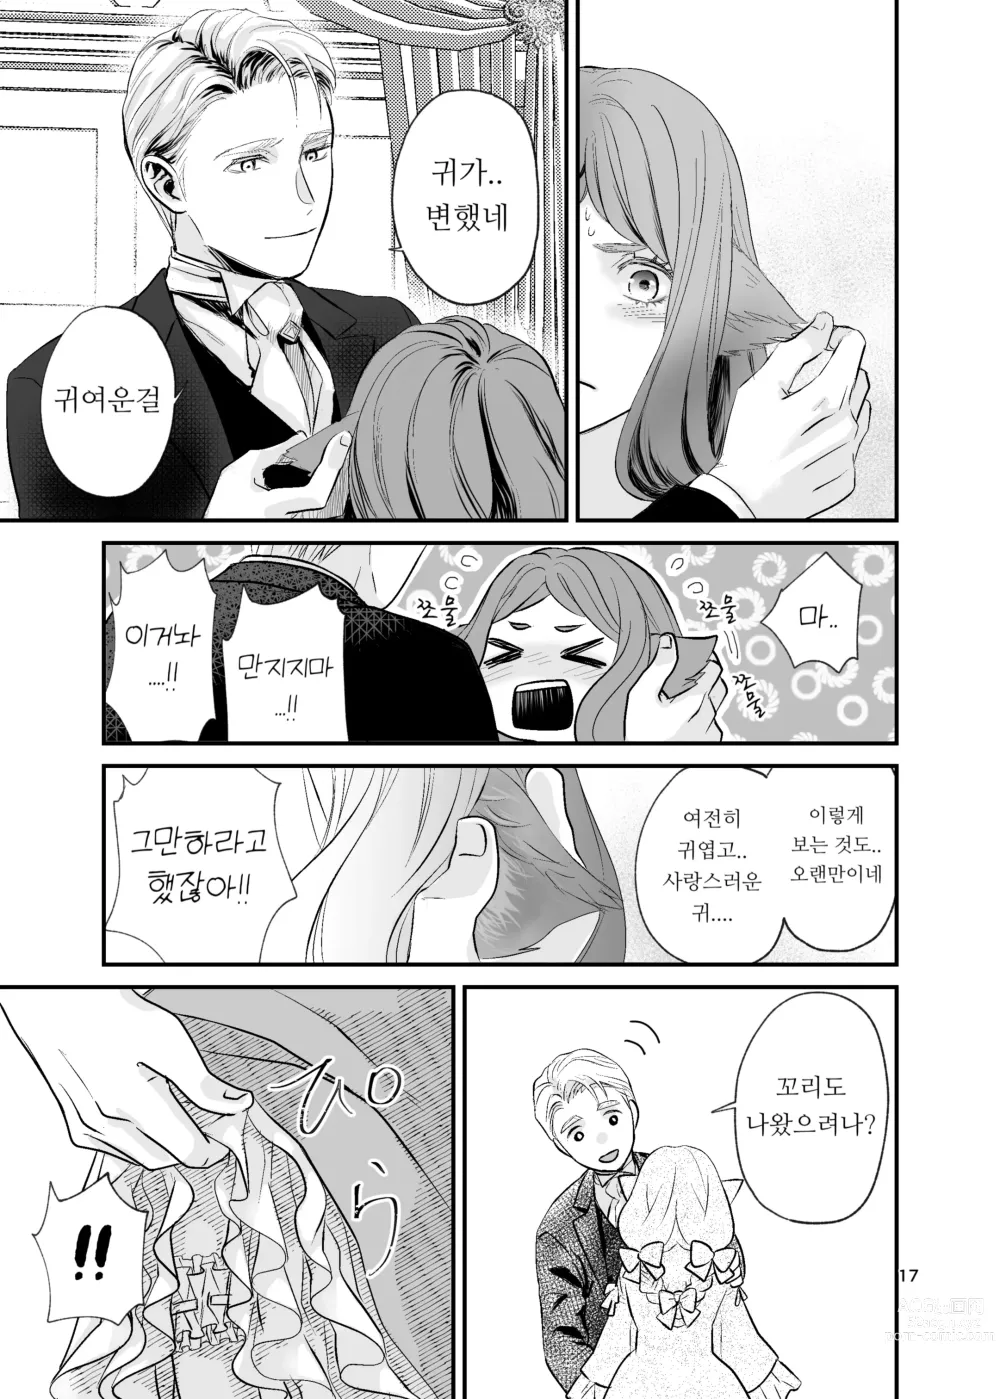 Page 17 of doujinshi 수인 영애와 혼약자